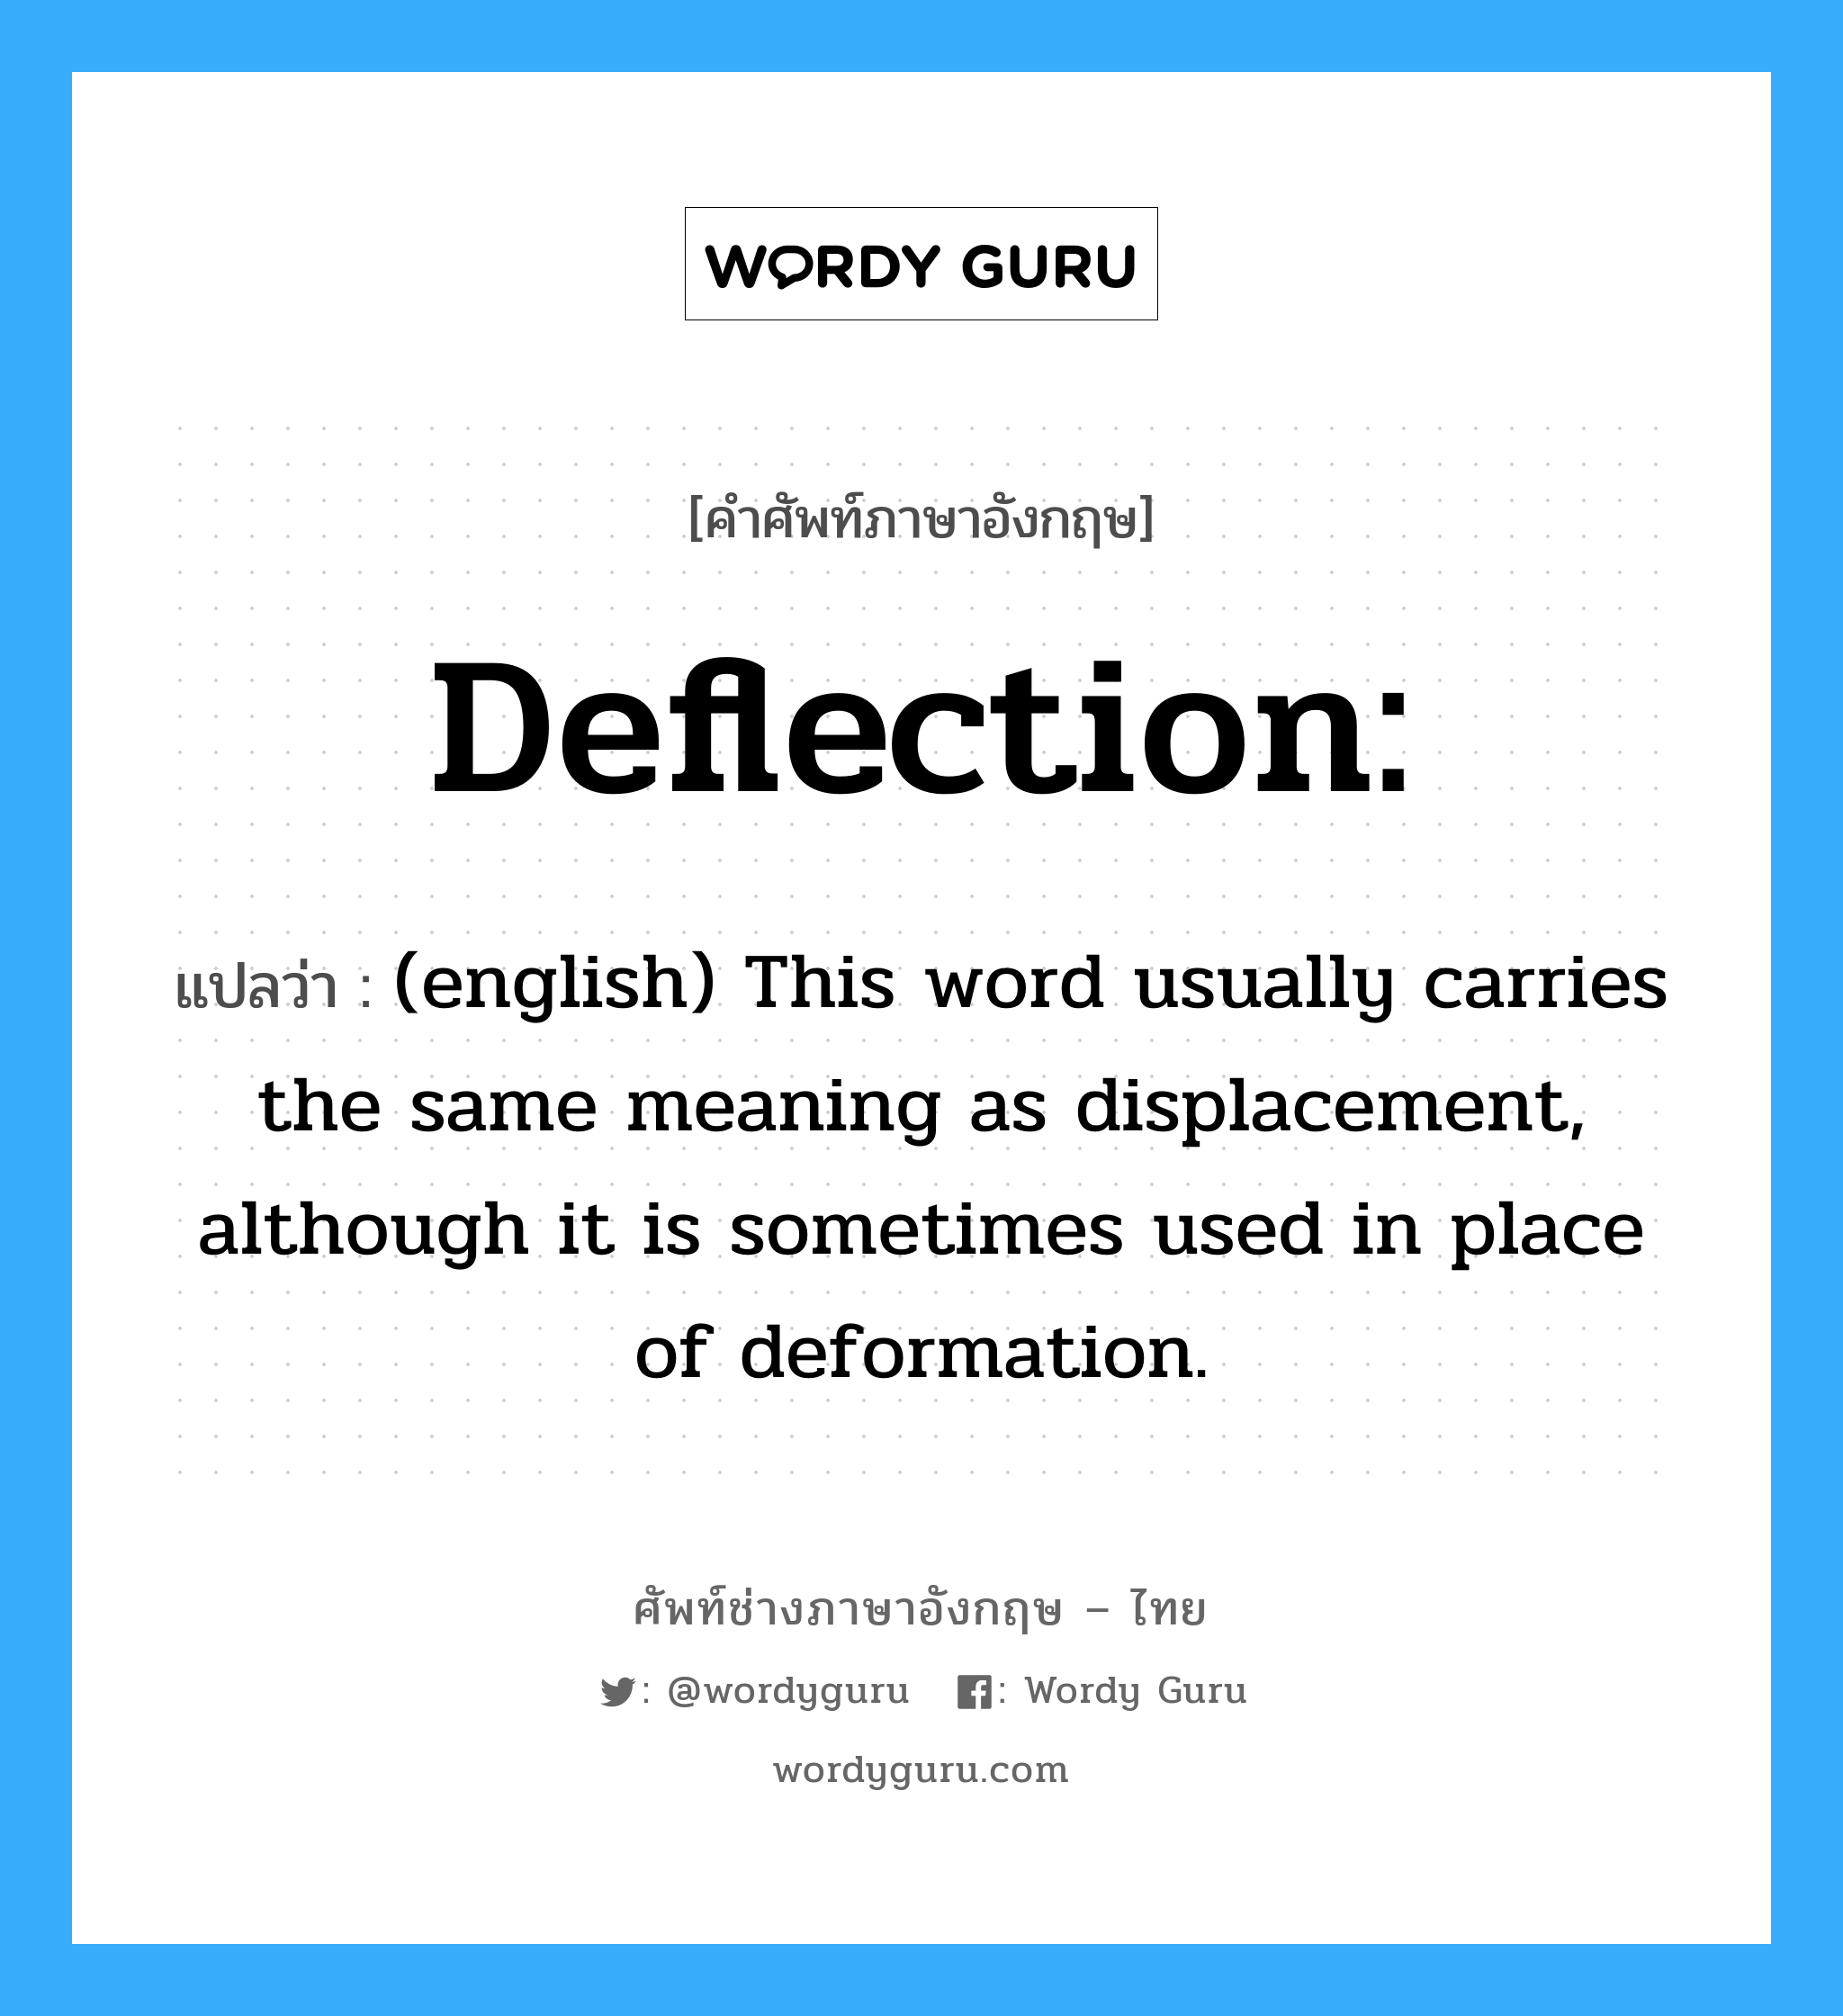 Deflection: แปลว่า?, คำศัพท์ช่างภาษาอังกฤษ - ไทย Deflection: คำศัพท์ภาษาอังกฤษ Deflection: แปลว่า (english) This word usually carries the same meaning as displacement, although it is sometimes used in place of deformation.